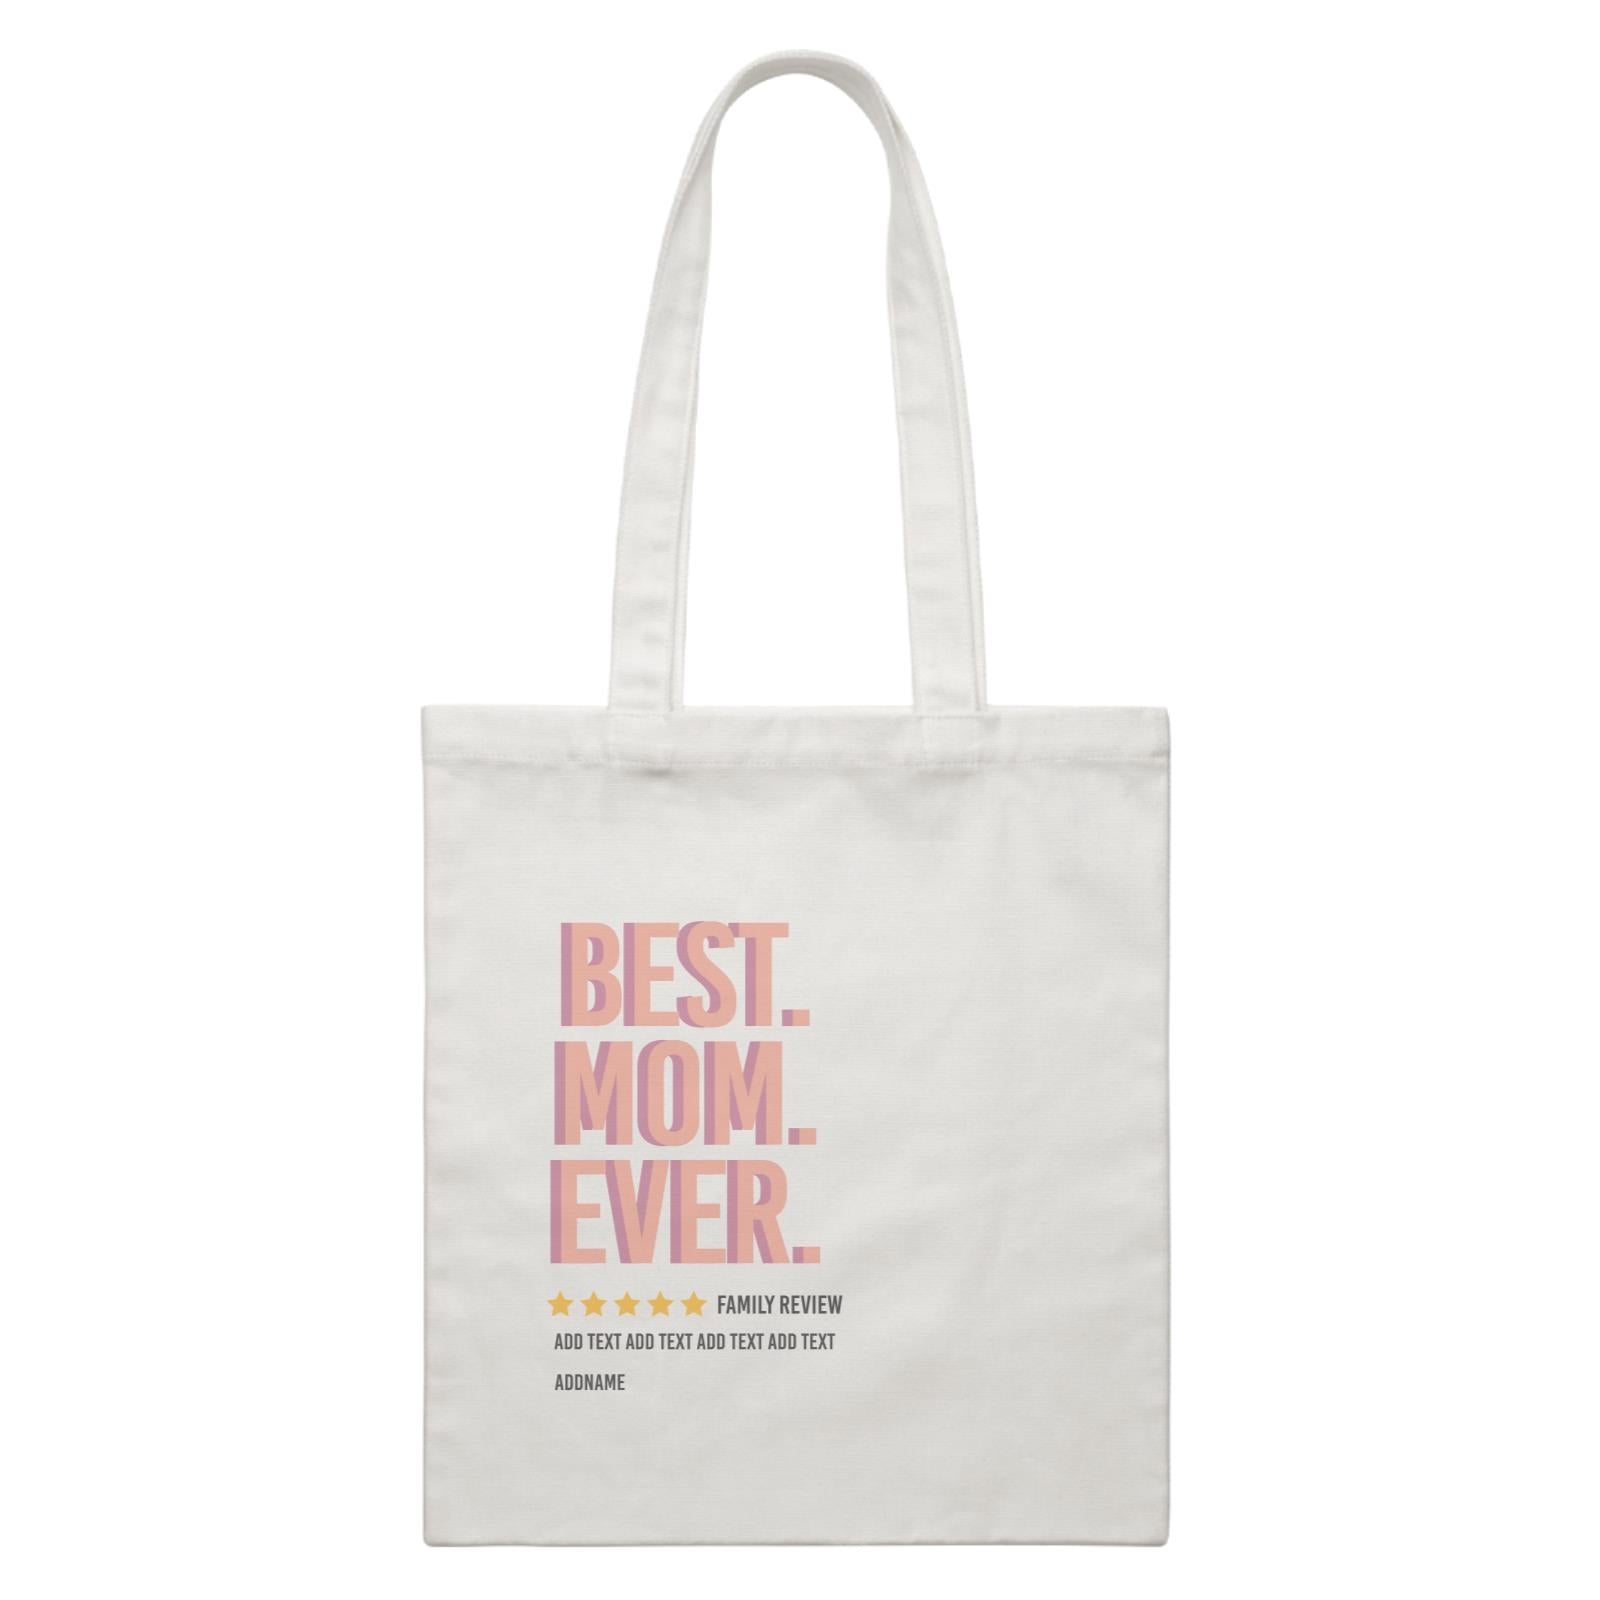 Awesome Mom 1 Best Mom Ever Family Review Add Text And Addname White Canvas Bag